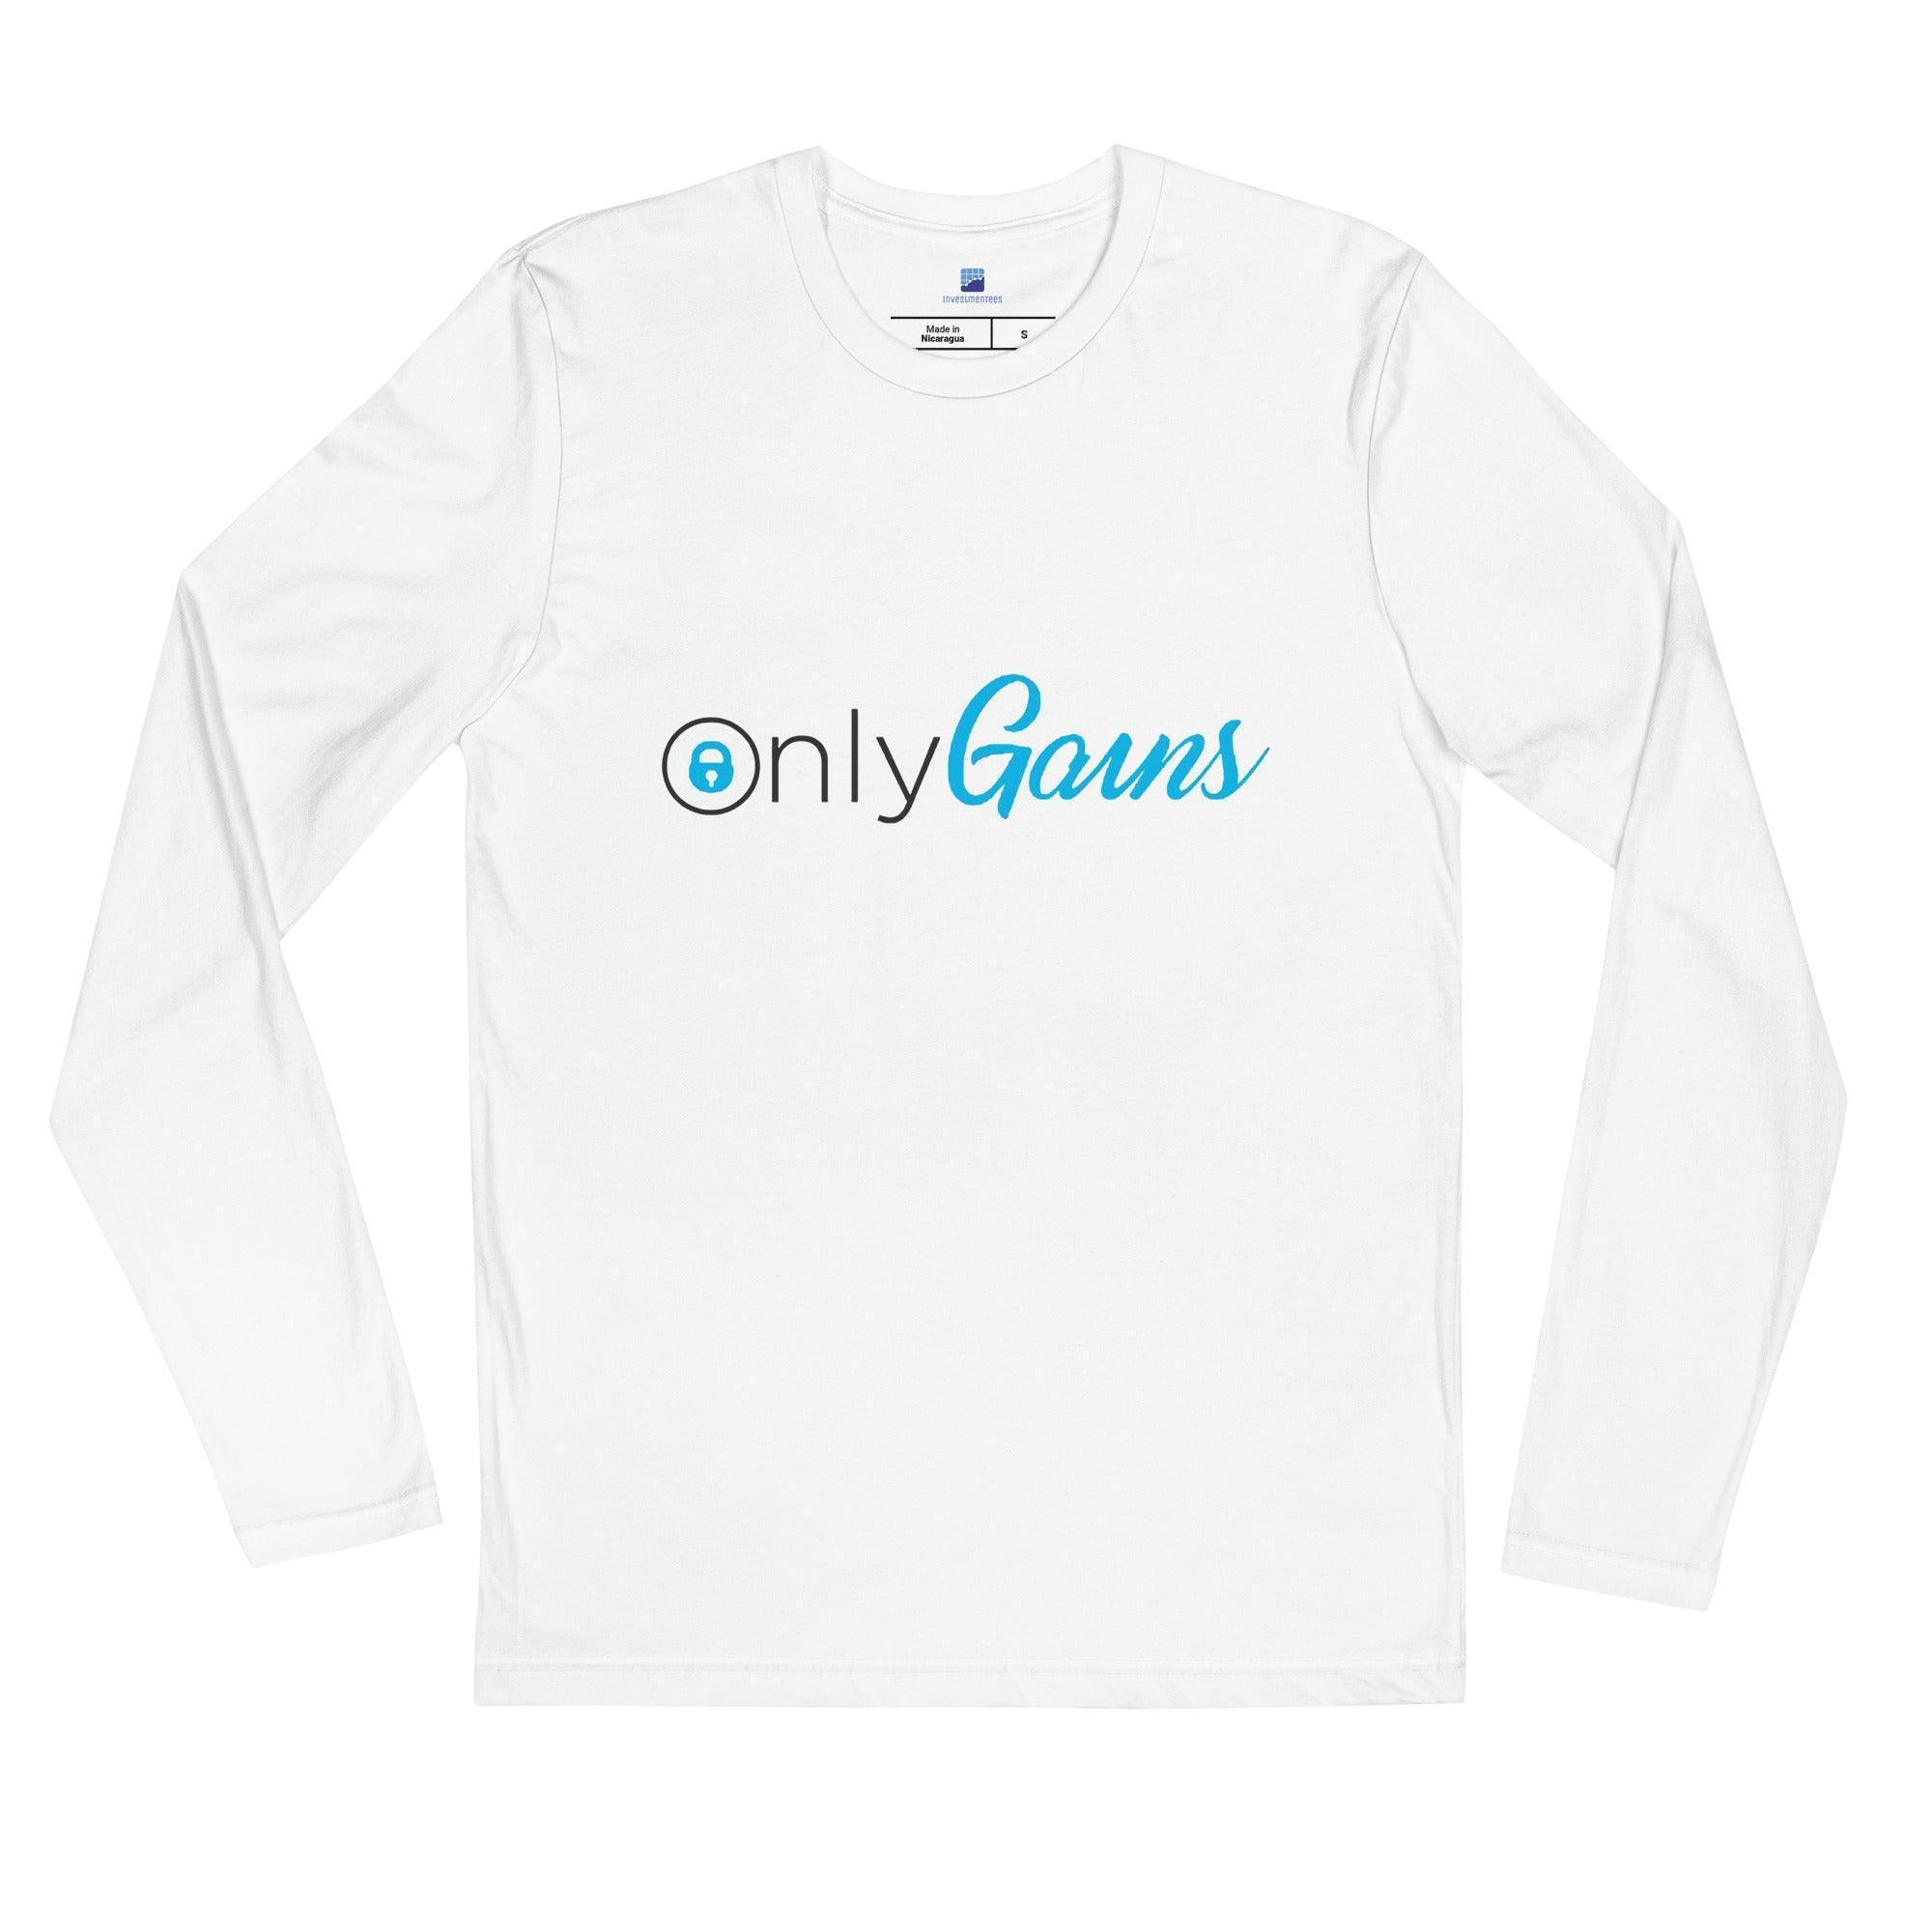 Only Gains Long Sleeve T-Shirt - InvestmenTees